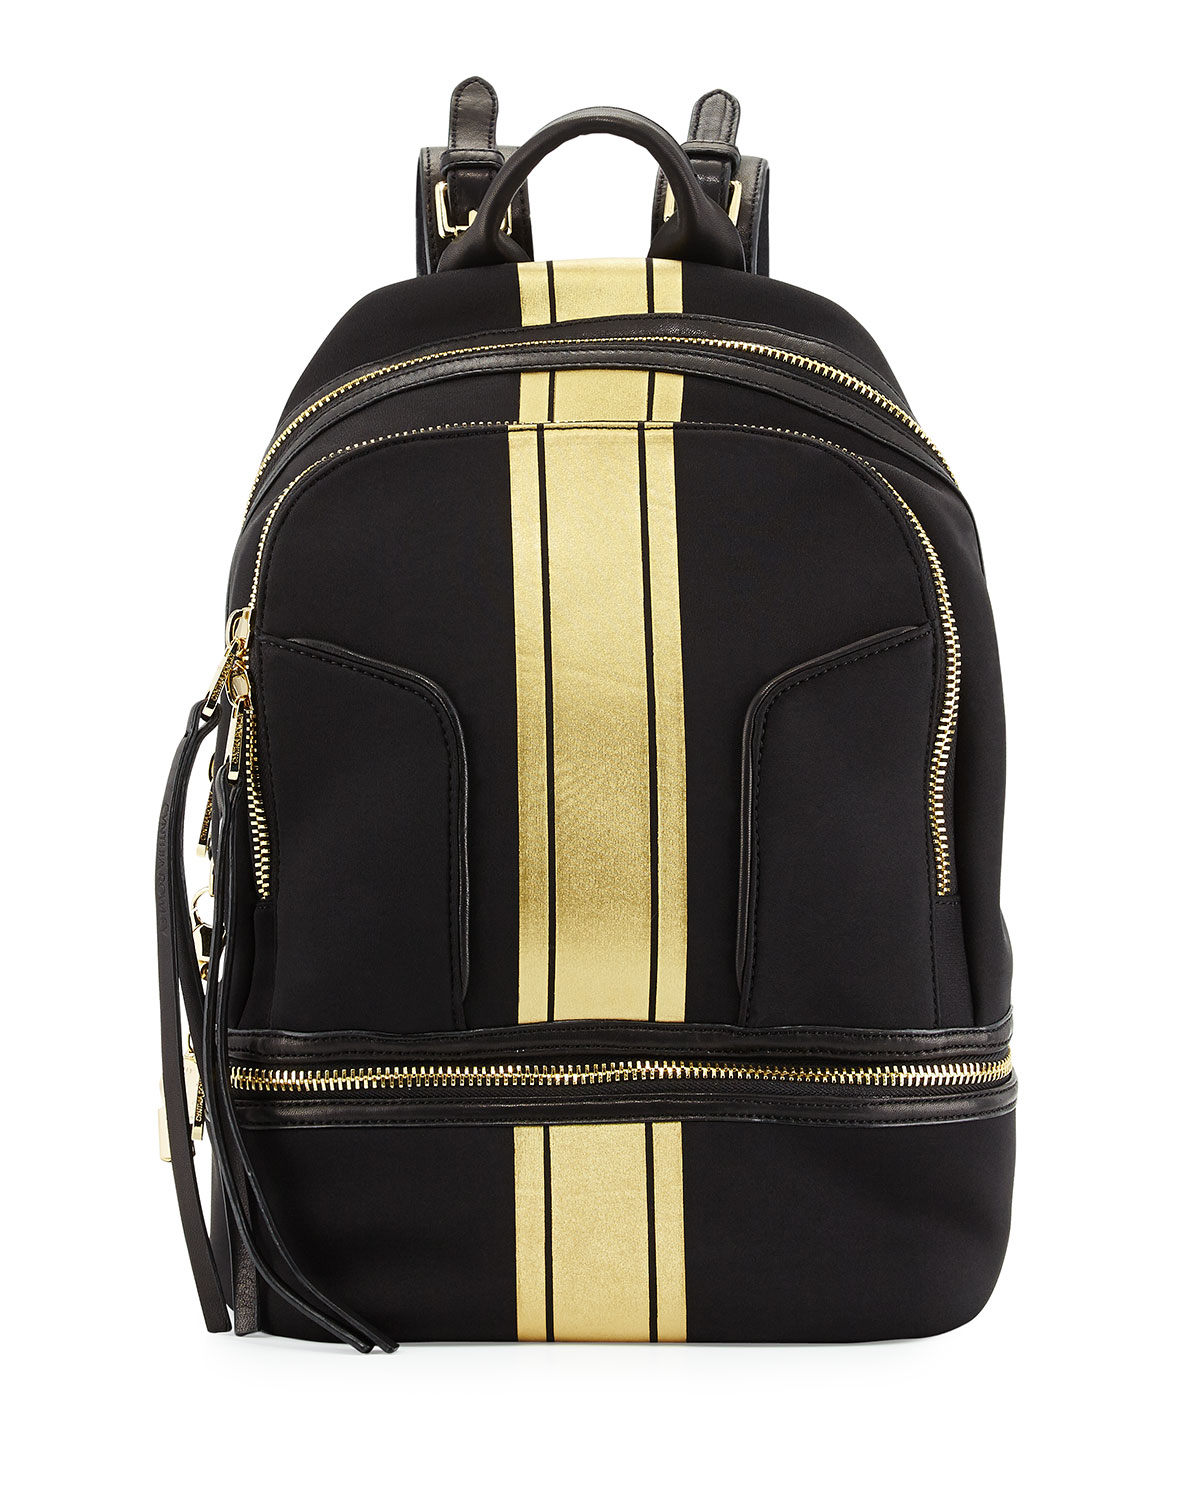 Cynthia rowley Scuba & Leather Brody Backpack in Black | Lyst